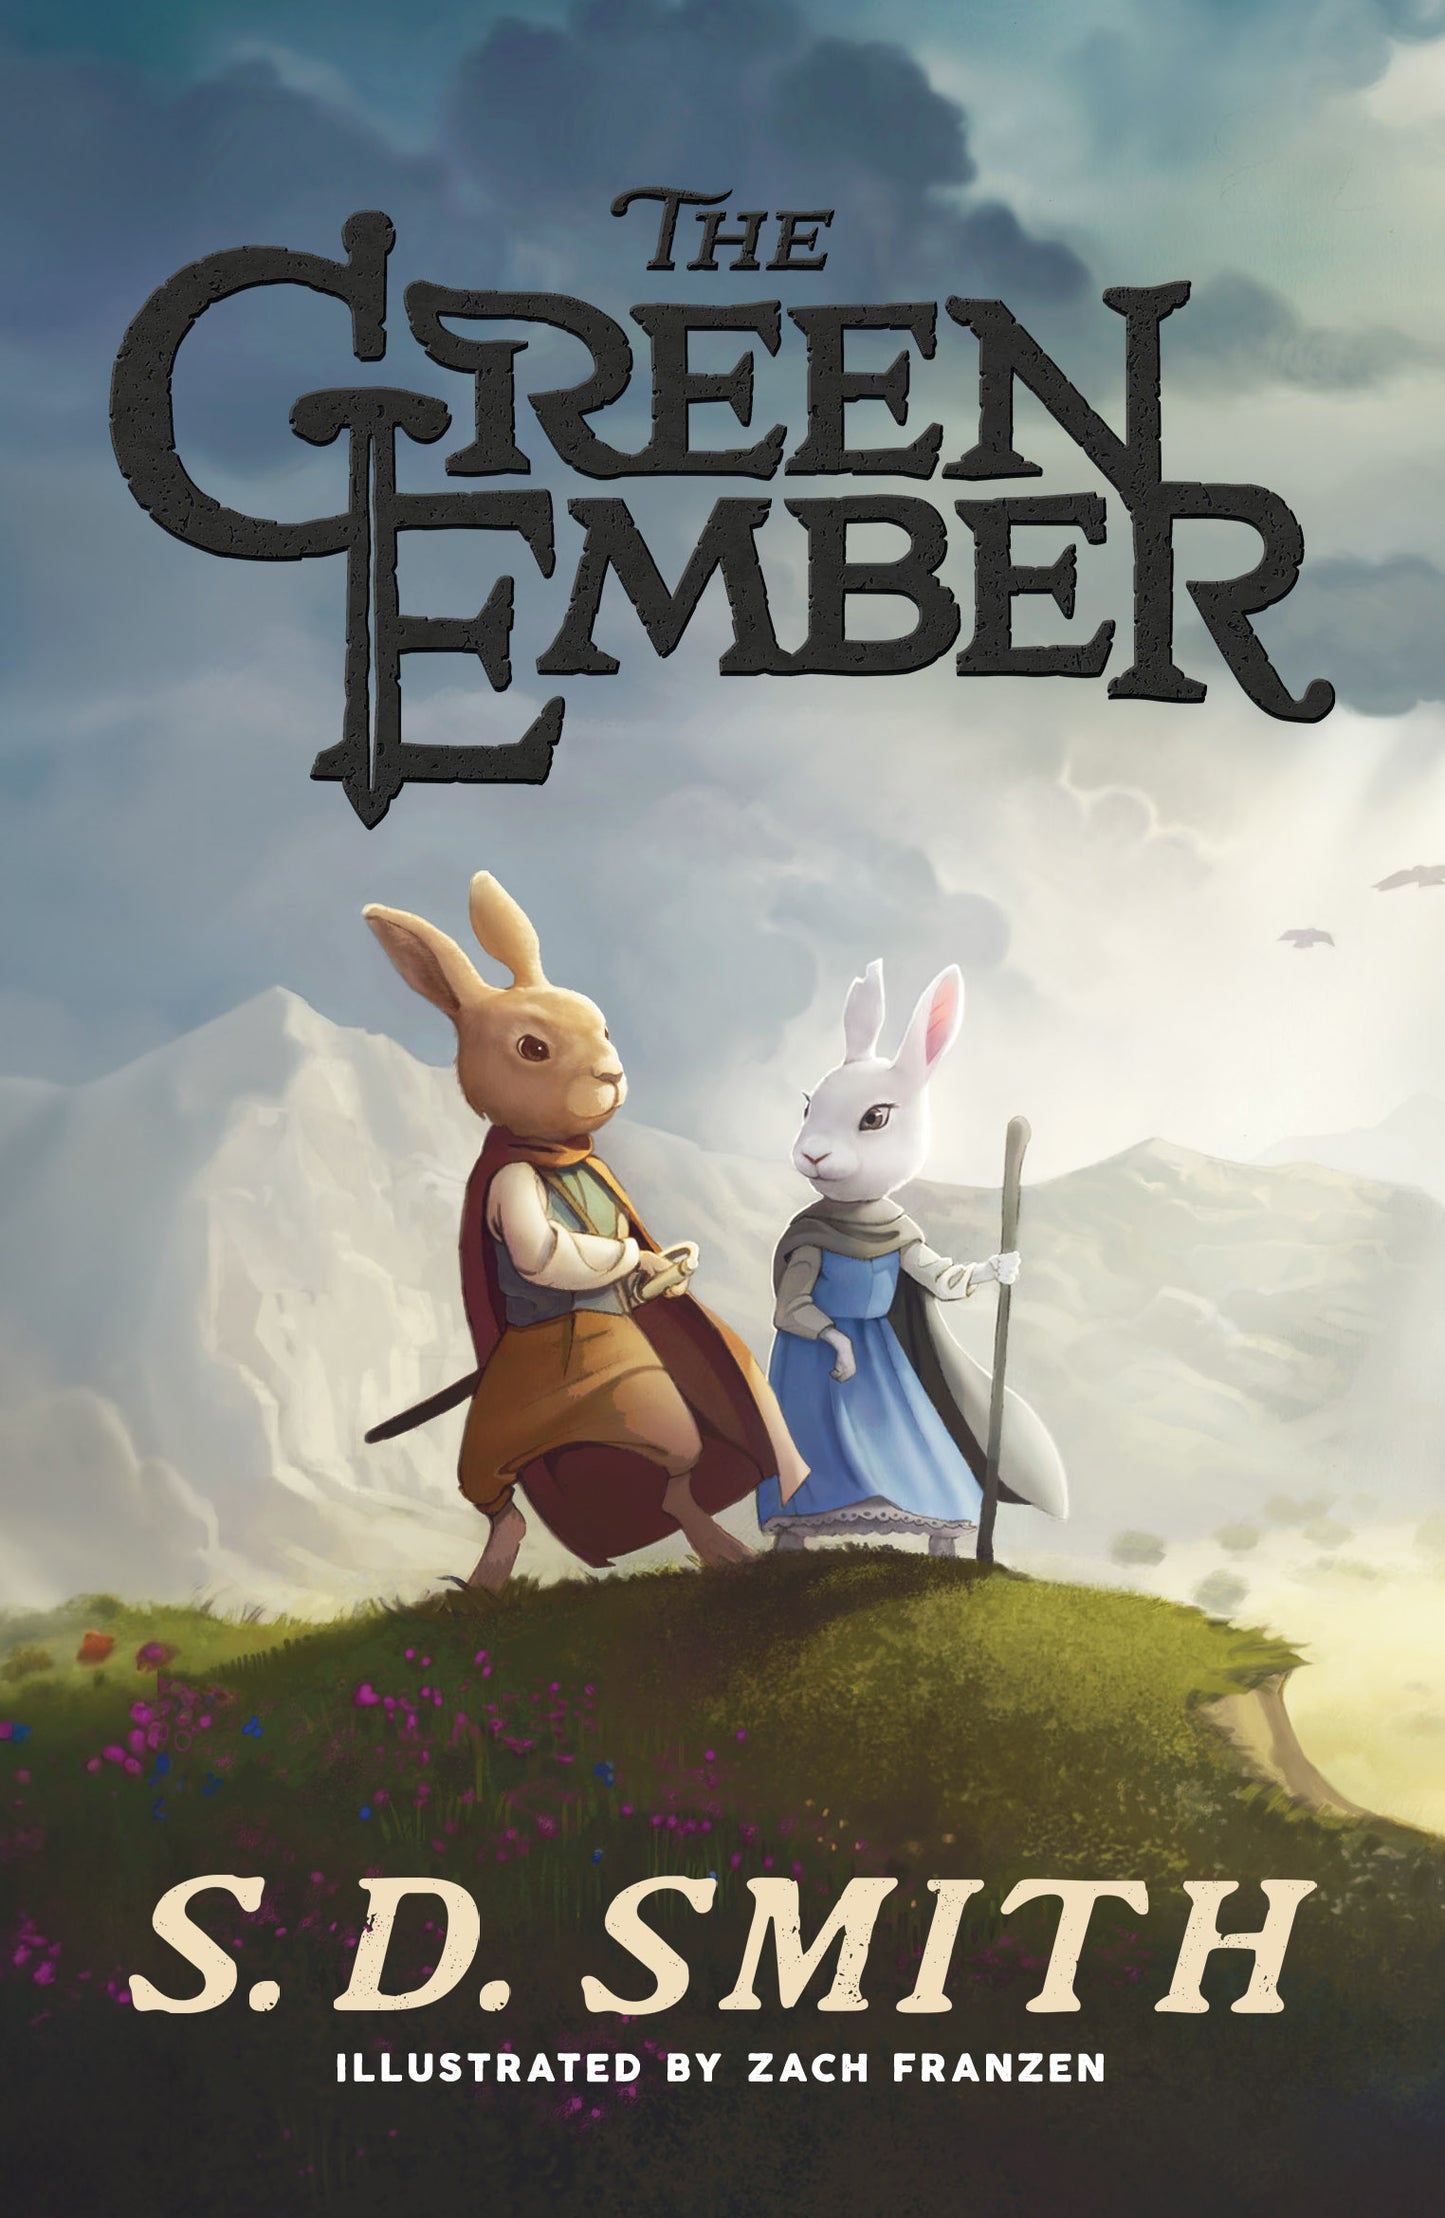 The Green Ember (book 1)